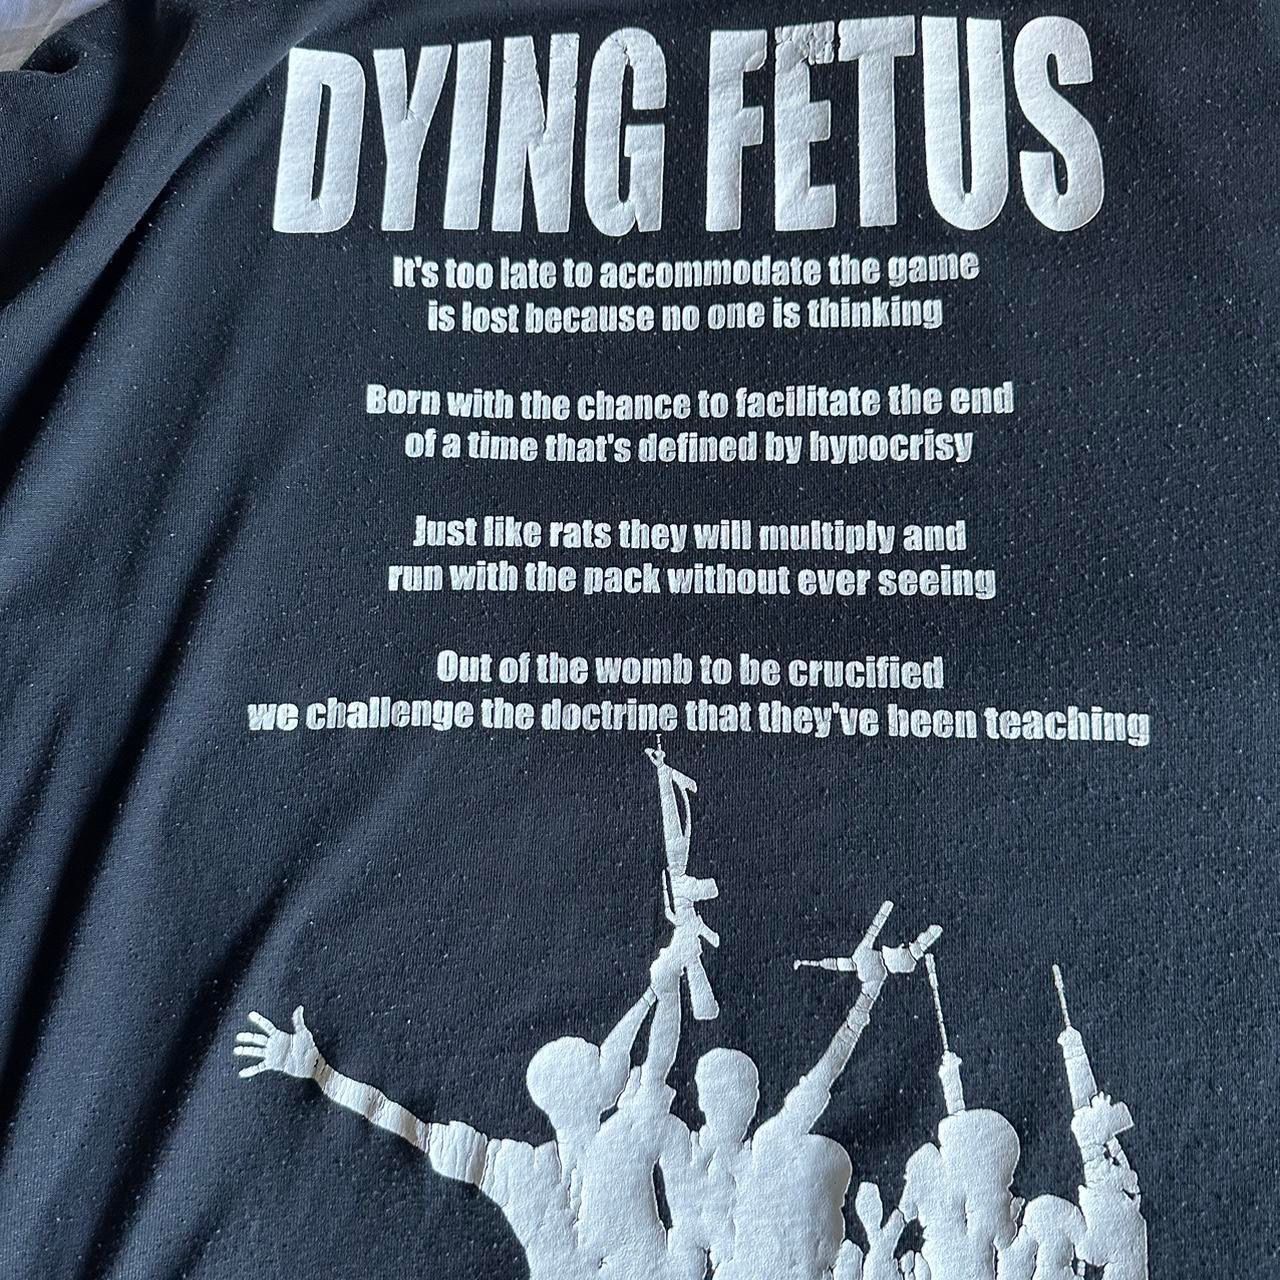 Streetwear Dying Fetus “Destroy The Opposition” Vintage Band Tee, XL Size US XL / EU 56 / 4 - 8 Preview